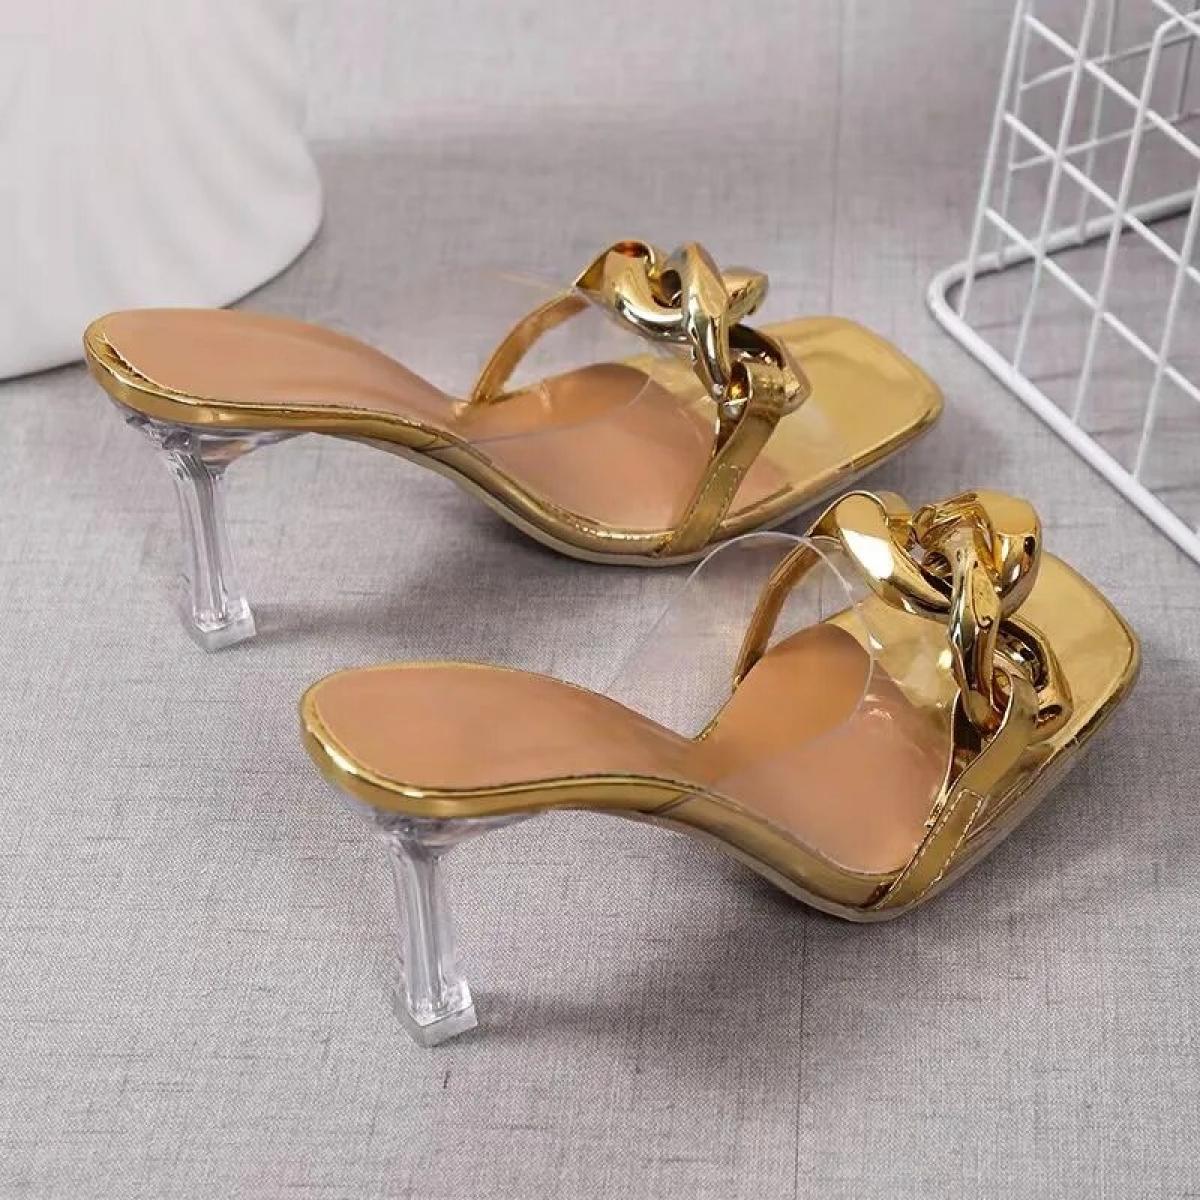 2022 Summer Big Chain Transparent Women's Slippers Of Sandals Square Toe Metal Chain High Heels Shoes Women Slides Thin 